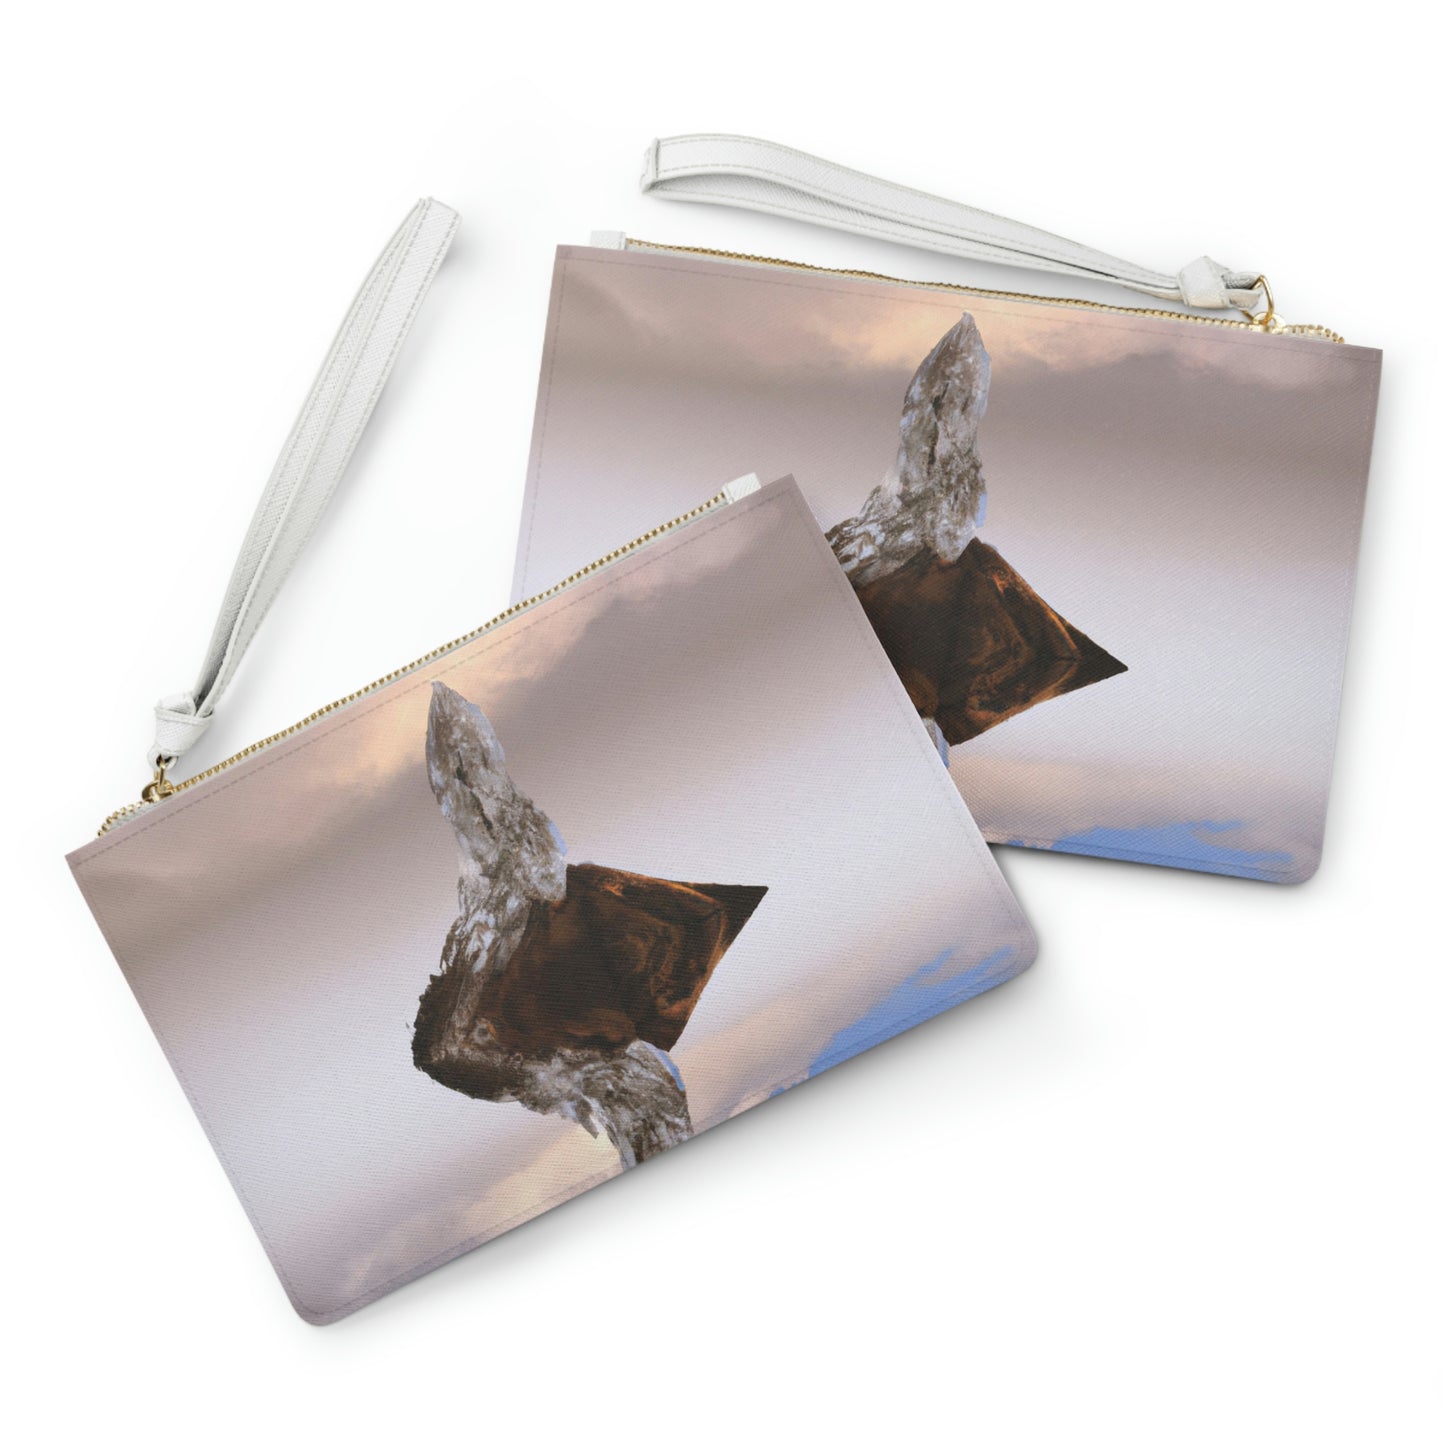 Icy Enchantment in the Lake - The Alien Clutch Bag